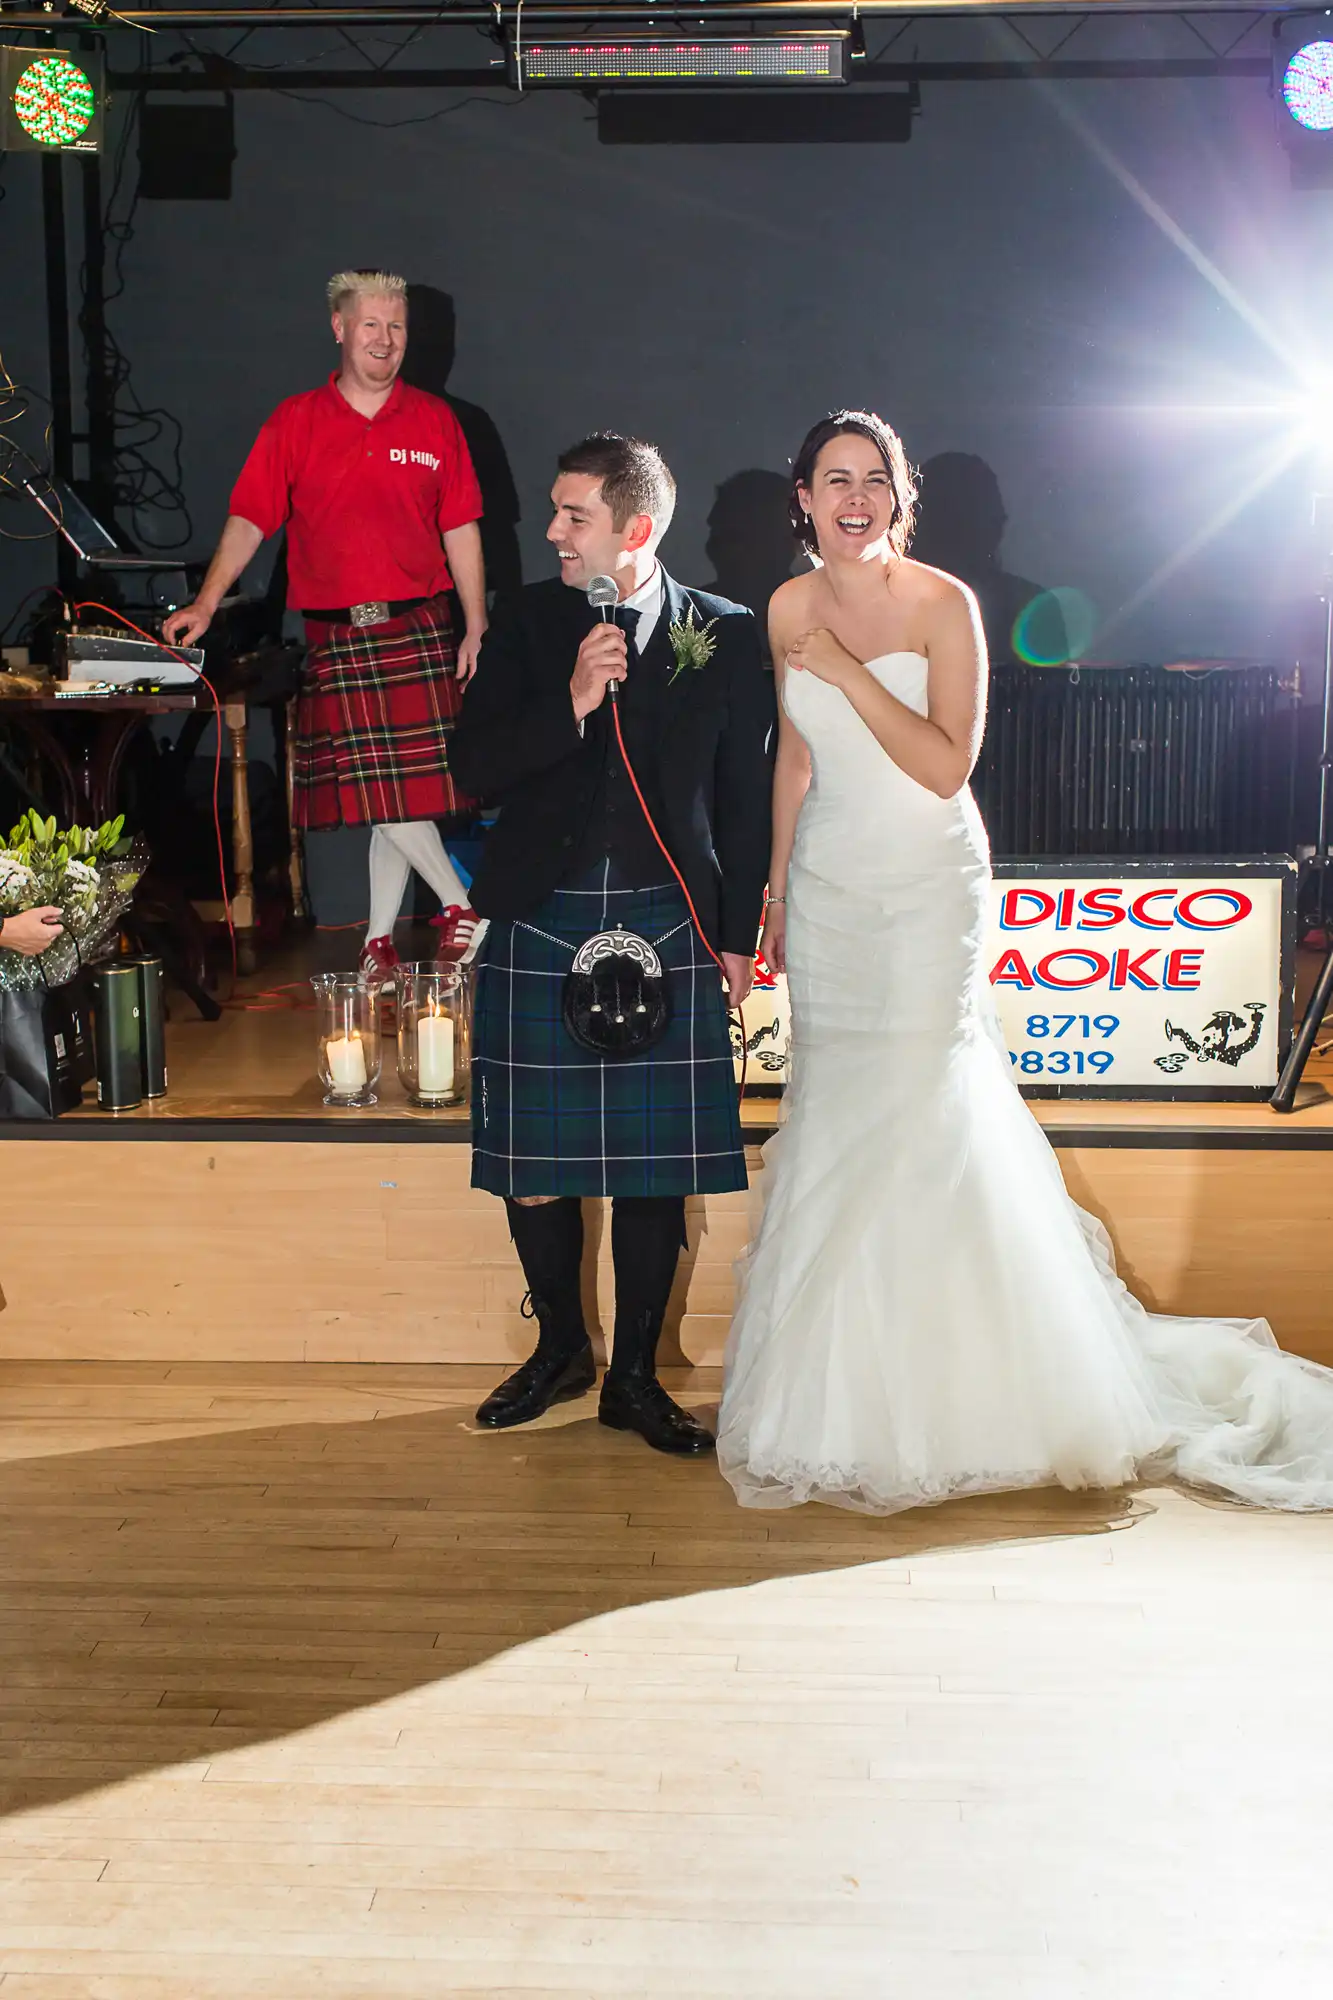 A bride and groom laugh joyously on a dance floor, with the groom holding a microphone. a man in a kilt observes behind them, next to a "disco karaoke" sign.